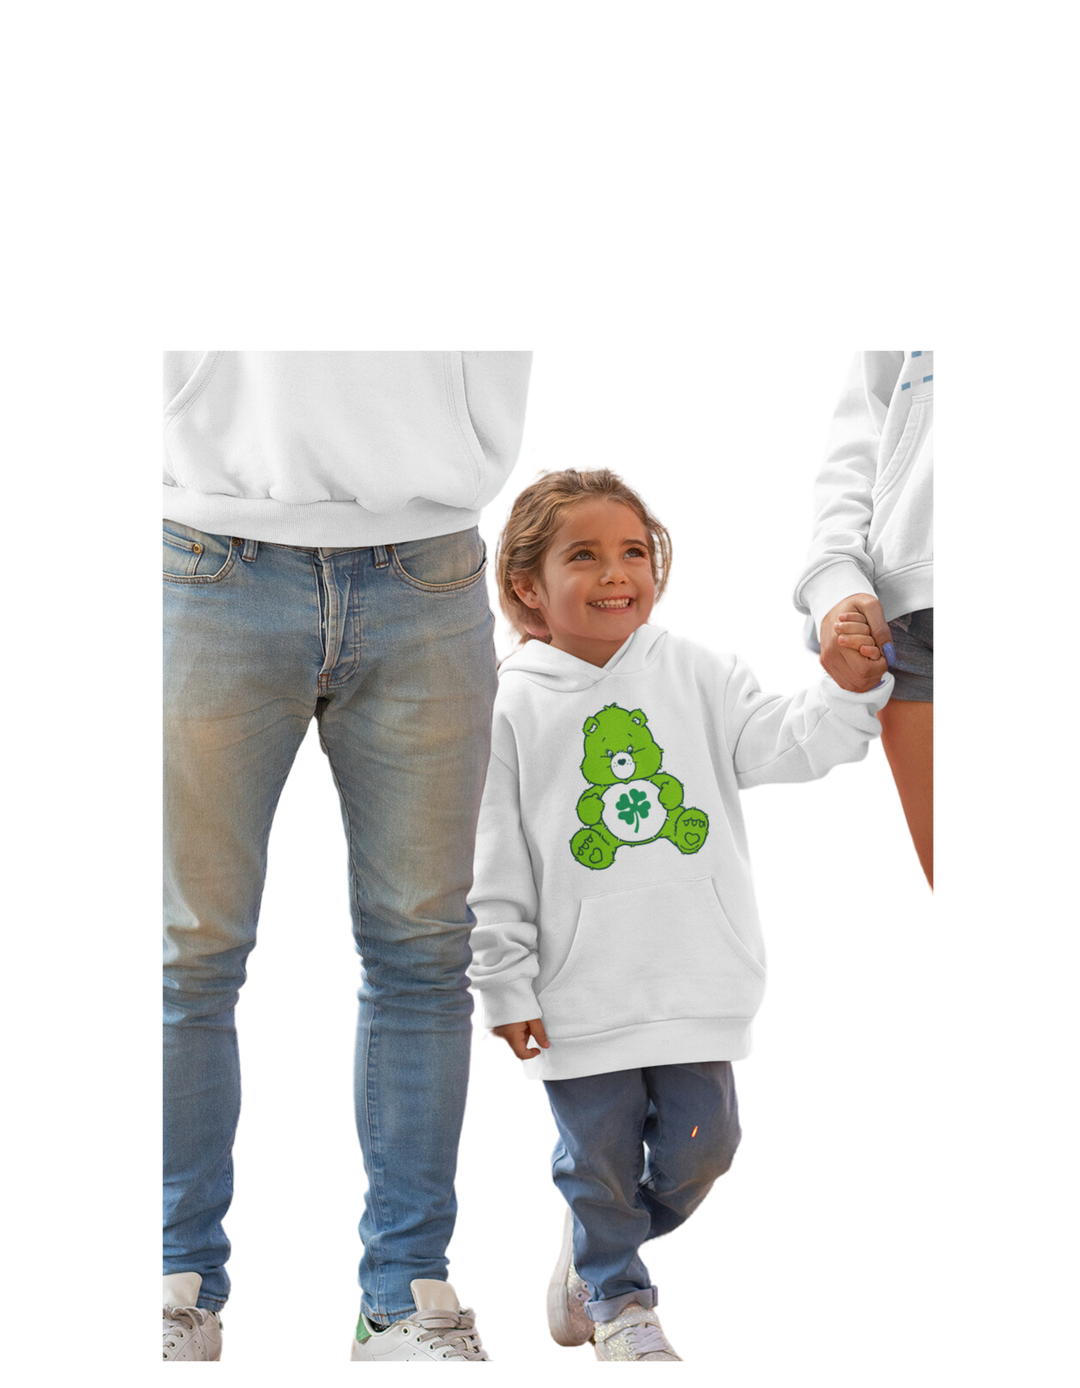 A Lucky Bear Youth Hoodie featuring a green teddy bear on a child holding hands with an adult. Made of soft cotton-polyester blend with kangaroo pocket and twill taping. Ideal for kids.